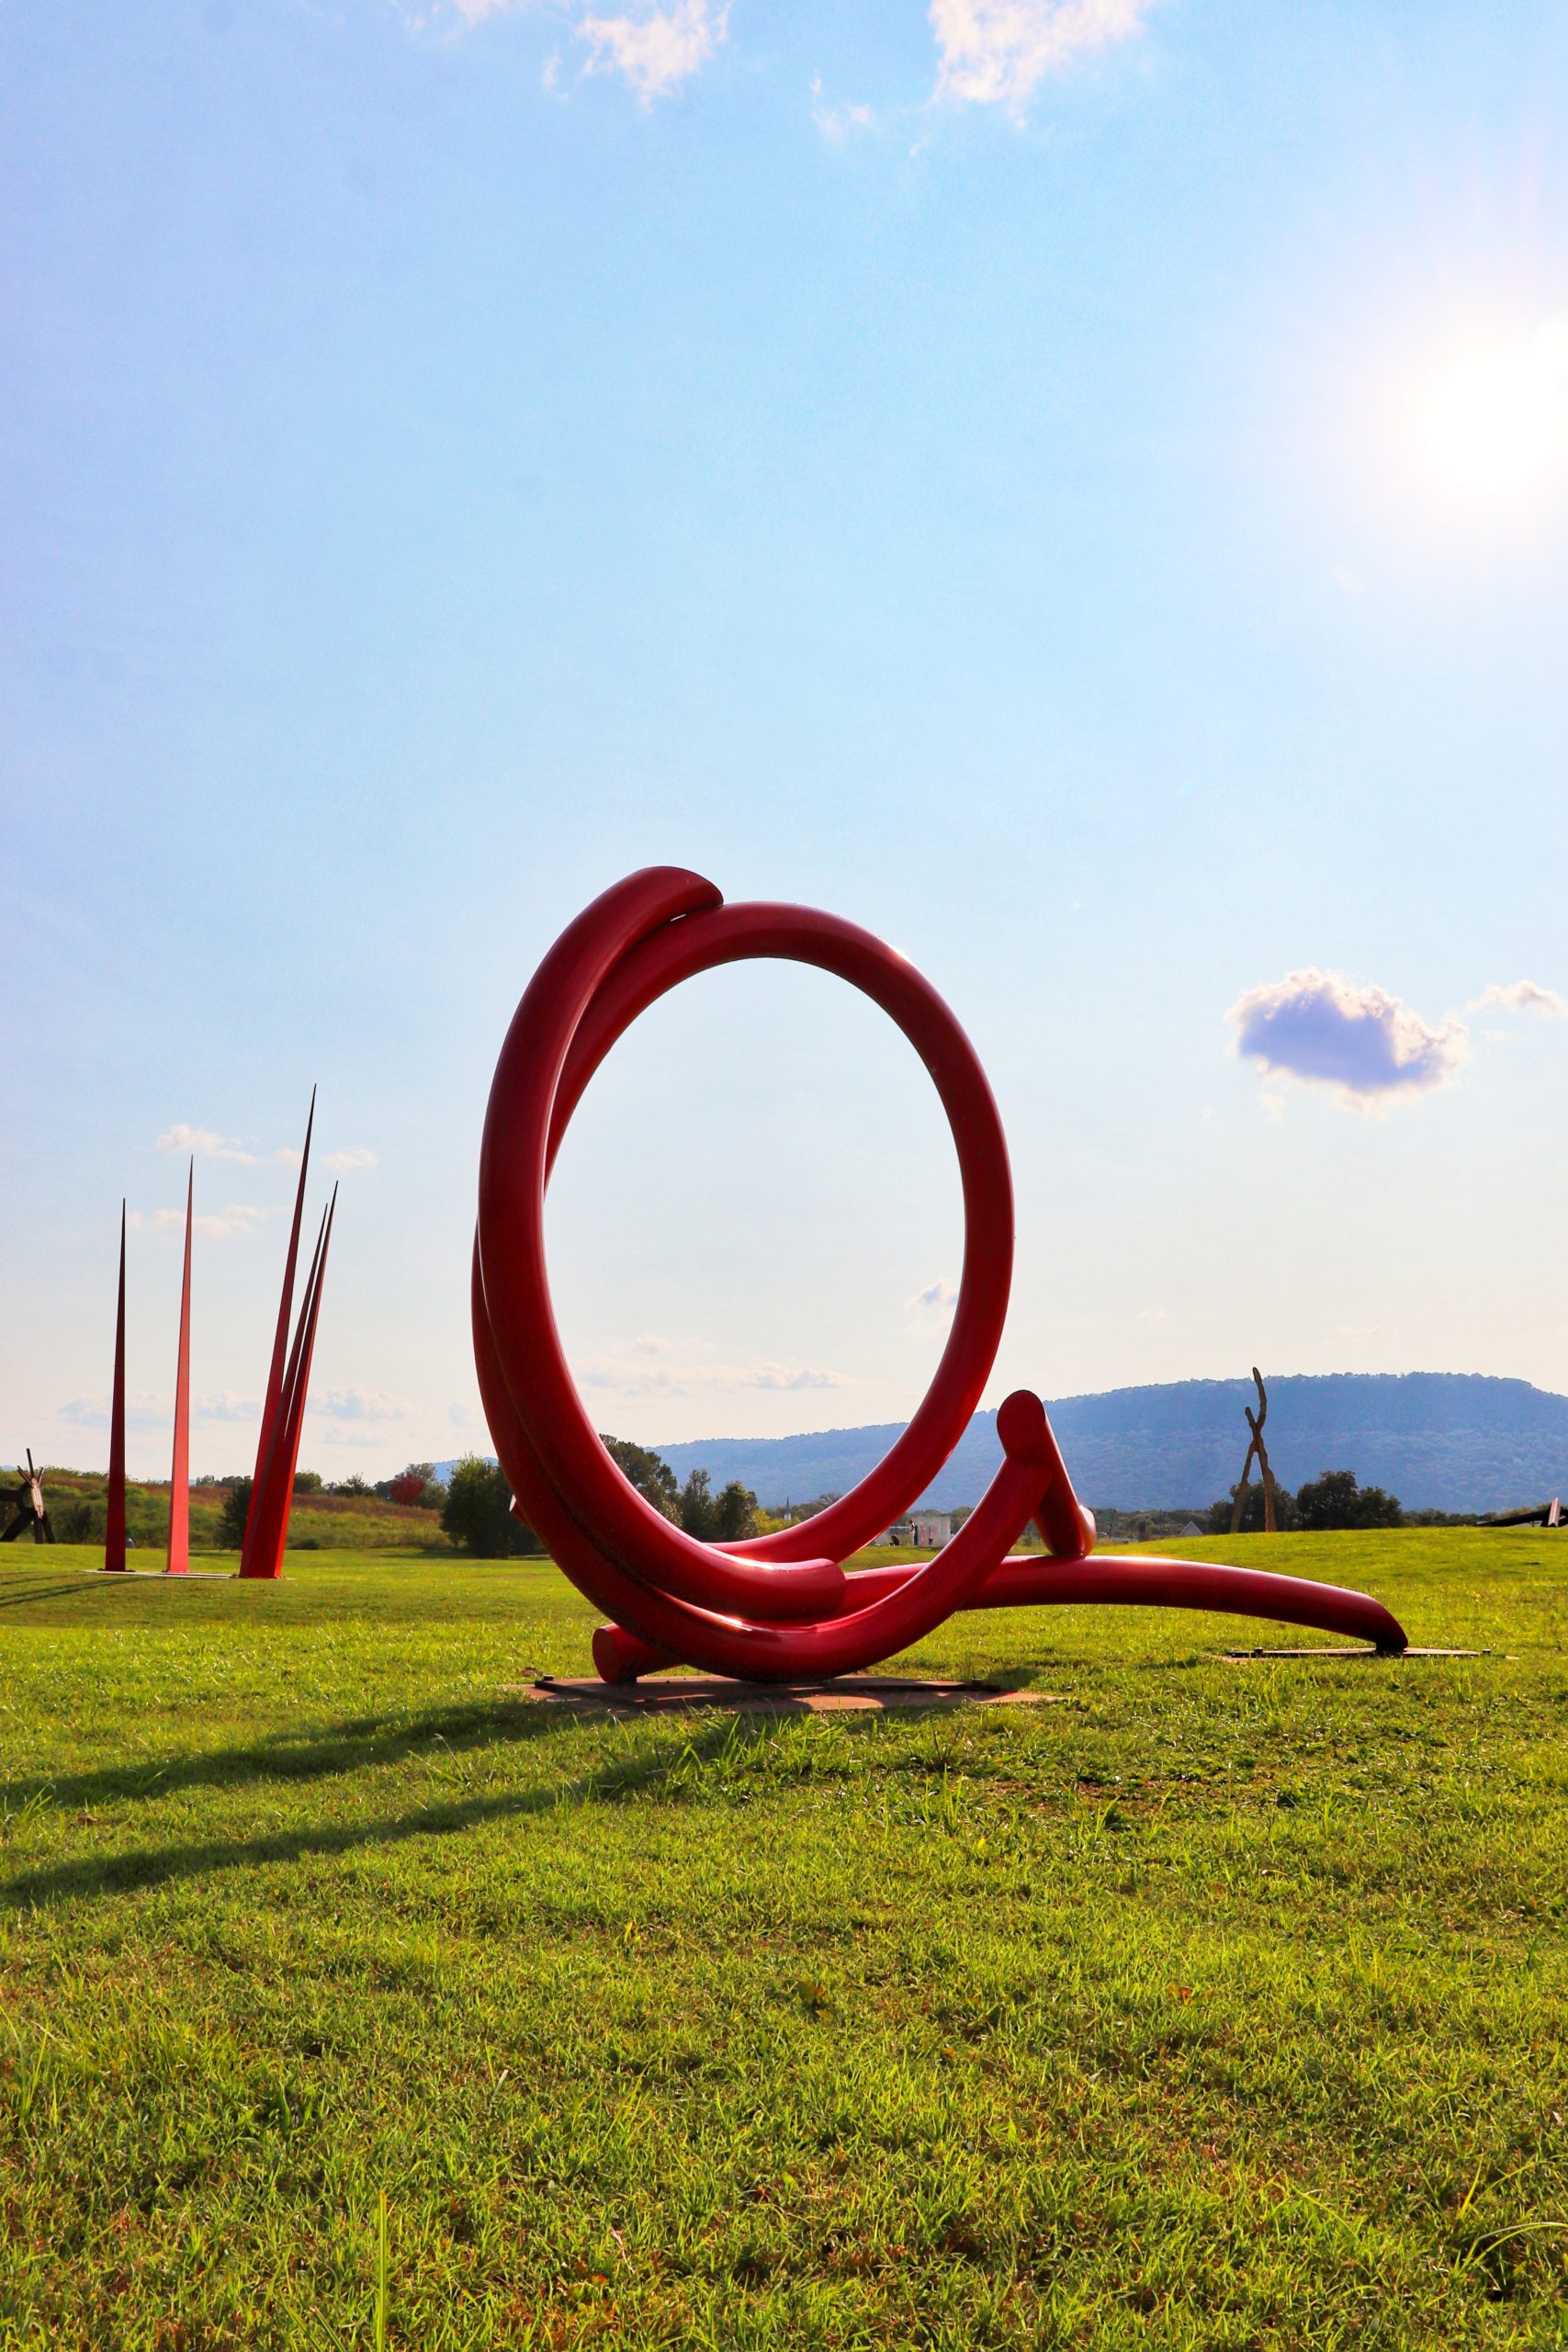 Chattanooga’s Sculpture Park Is a Must-See Attraction